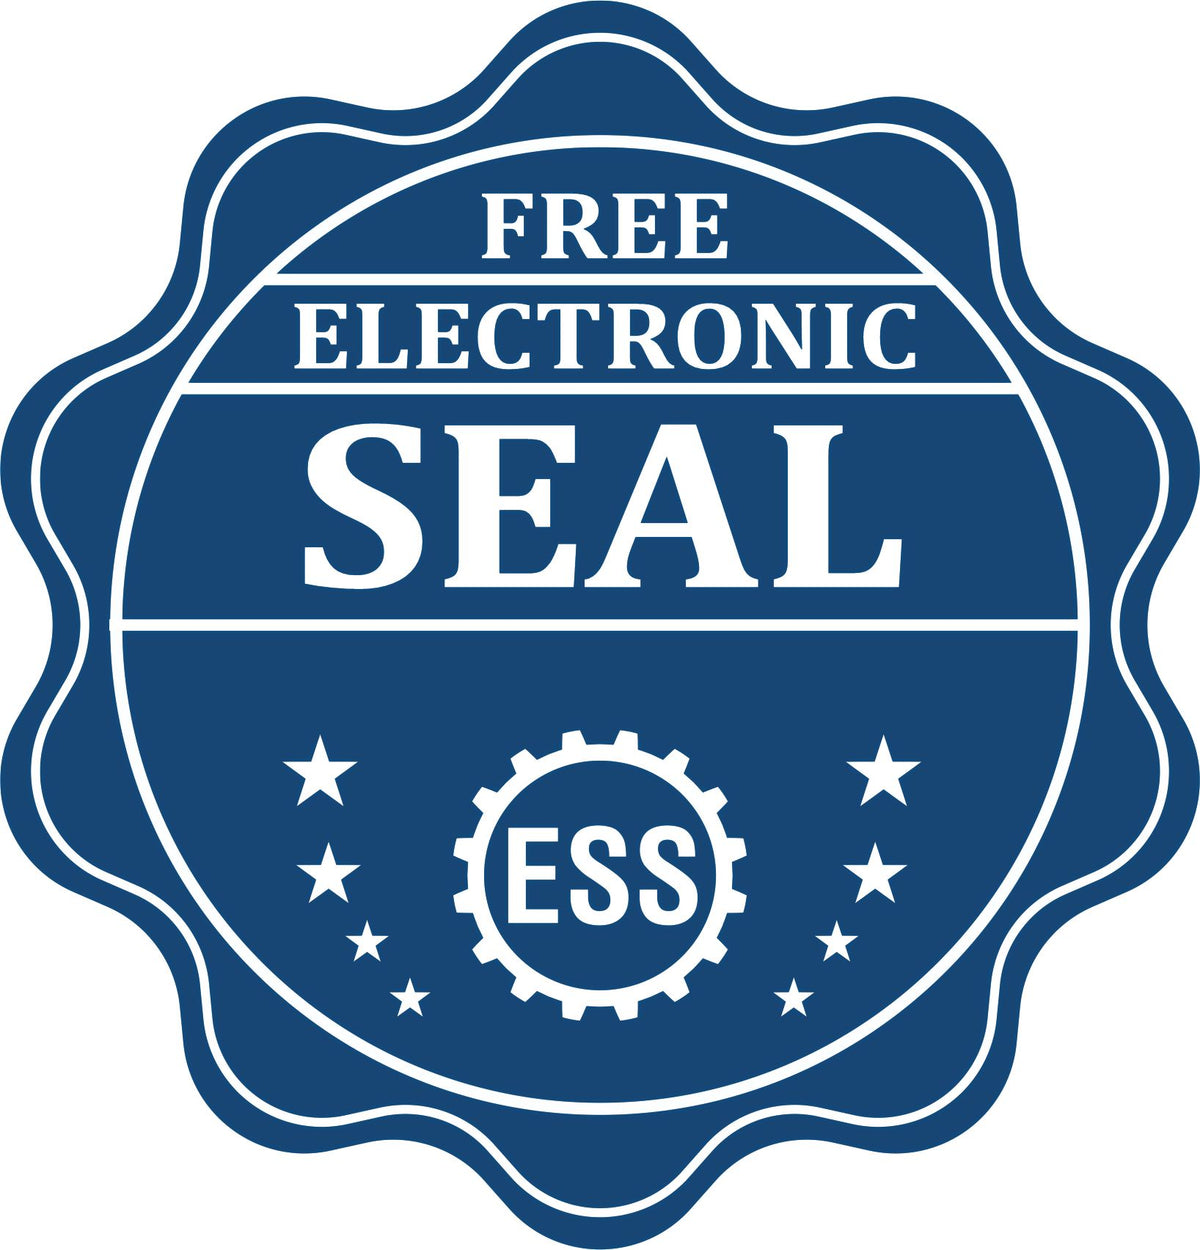 A badge showing a free electronic seal for the State of Michigan Extended Long Reach Geologist Seal with stars and the ESS gear on the emblem.